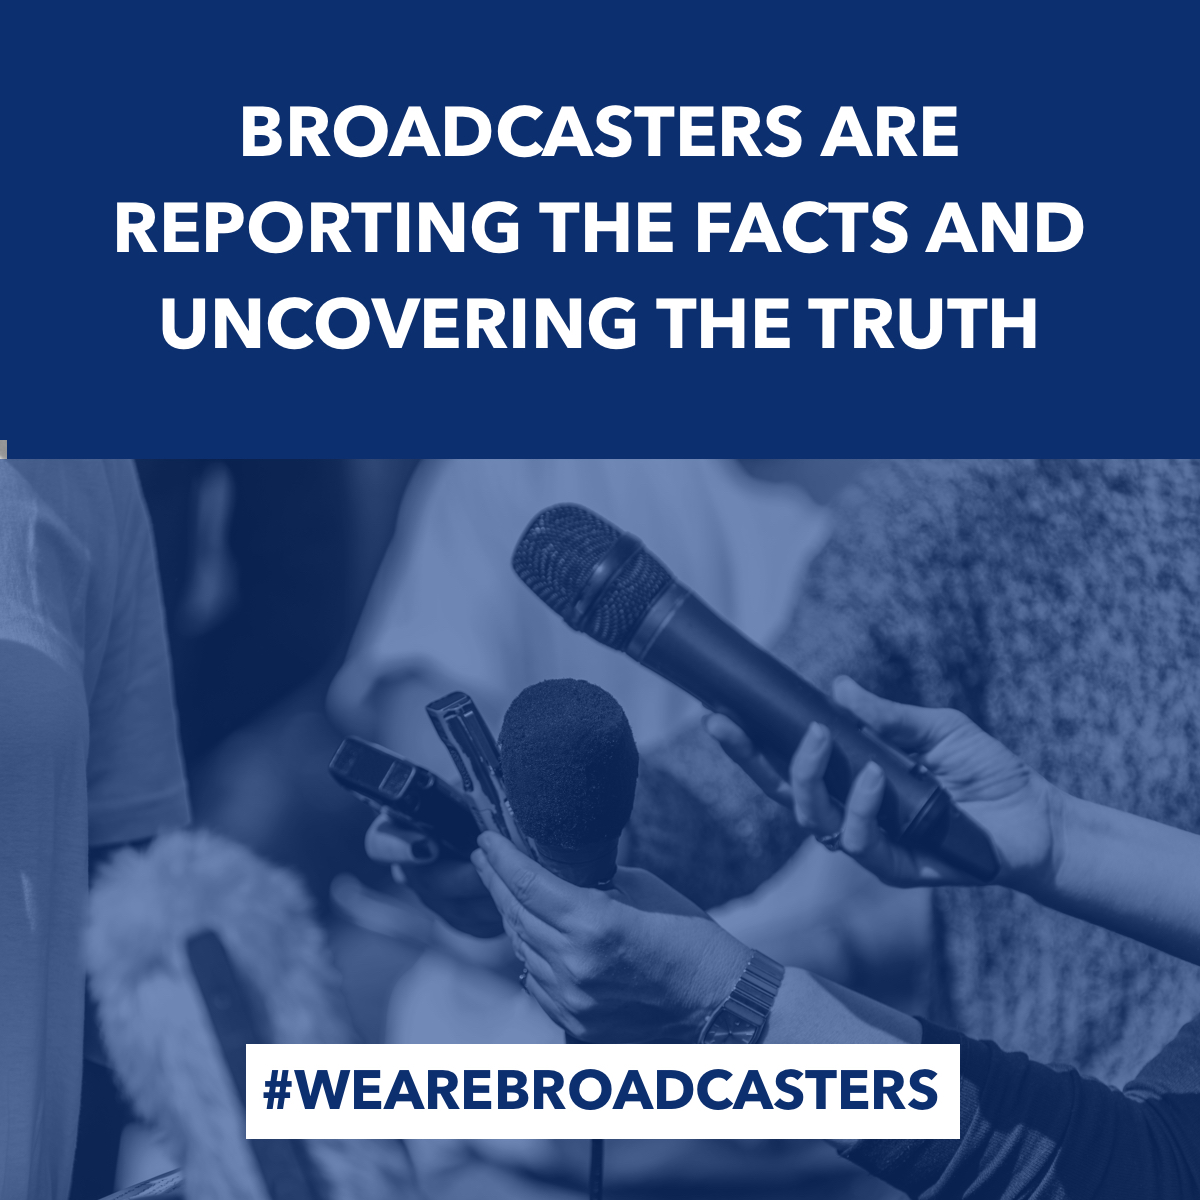 Broadcasters are reporting the facts and uncovering the truth